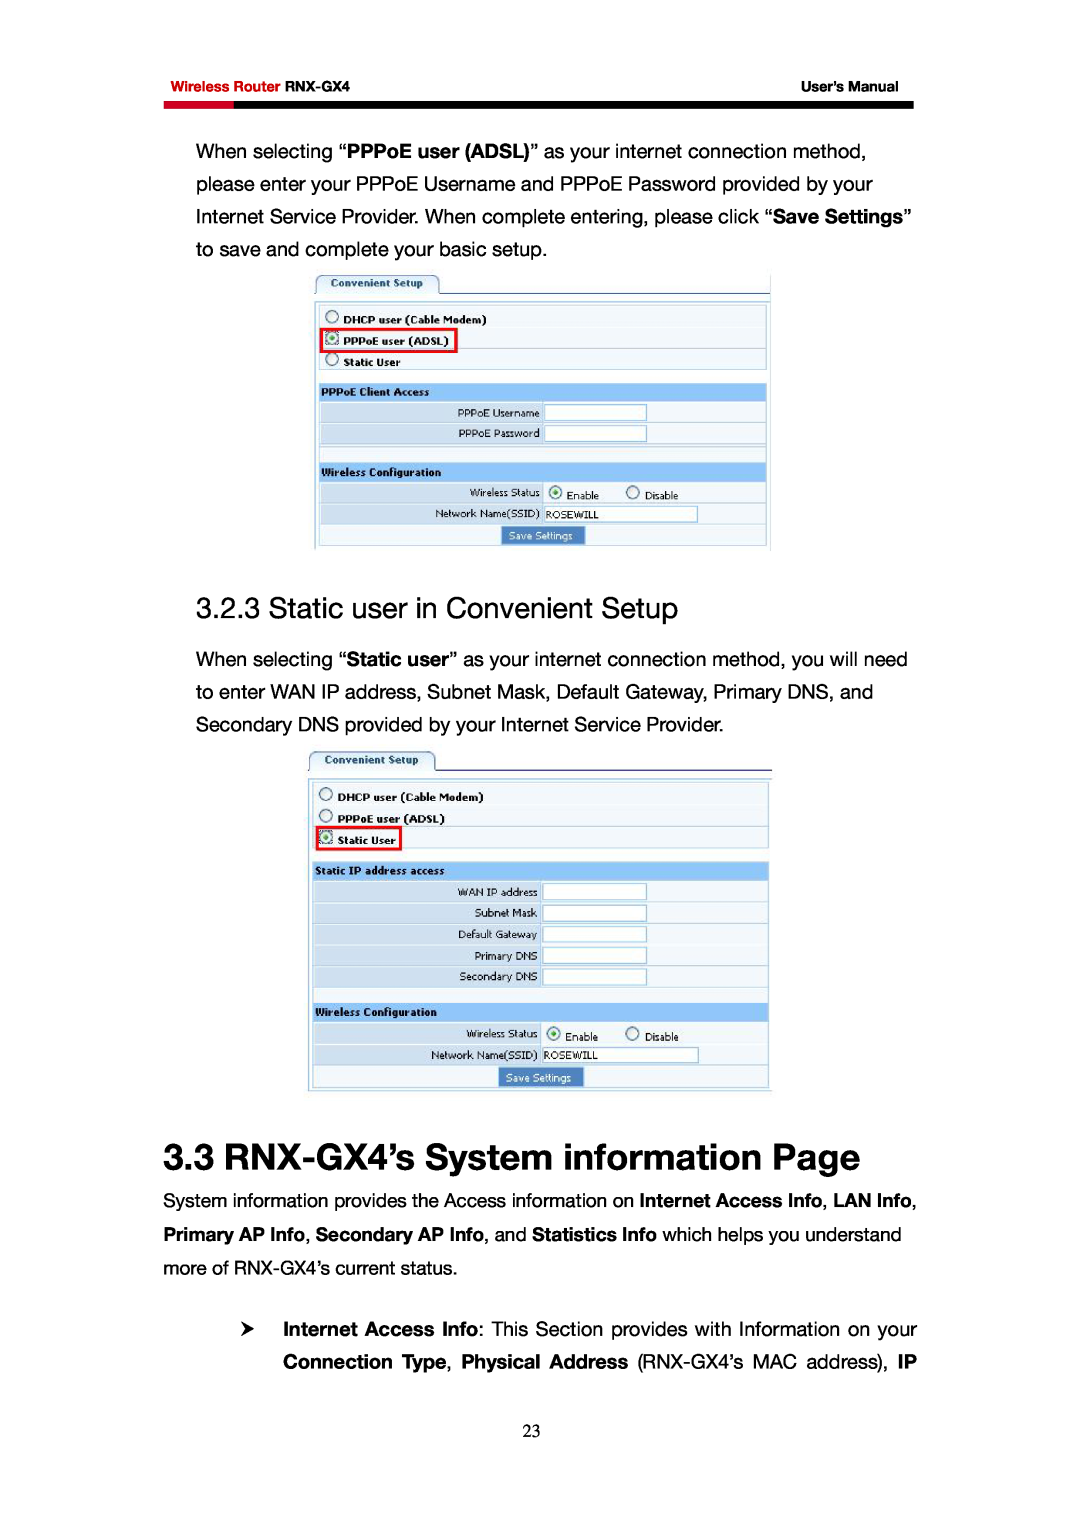 Rosewill user manual RNX-GX4’s System information Page, Static user in Convenient Setup 